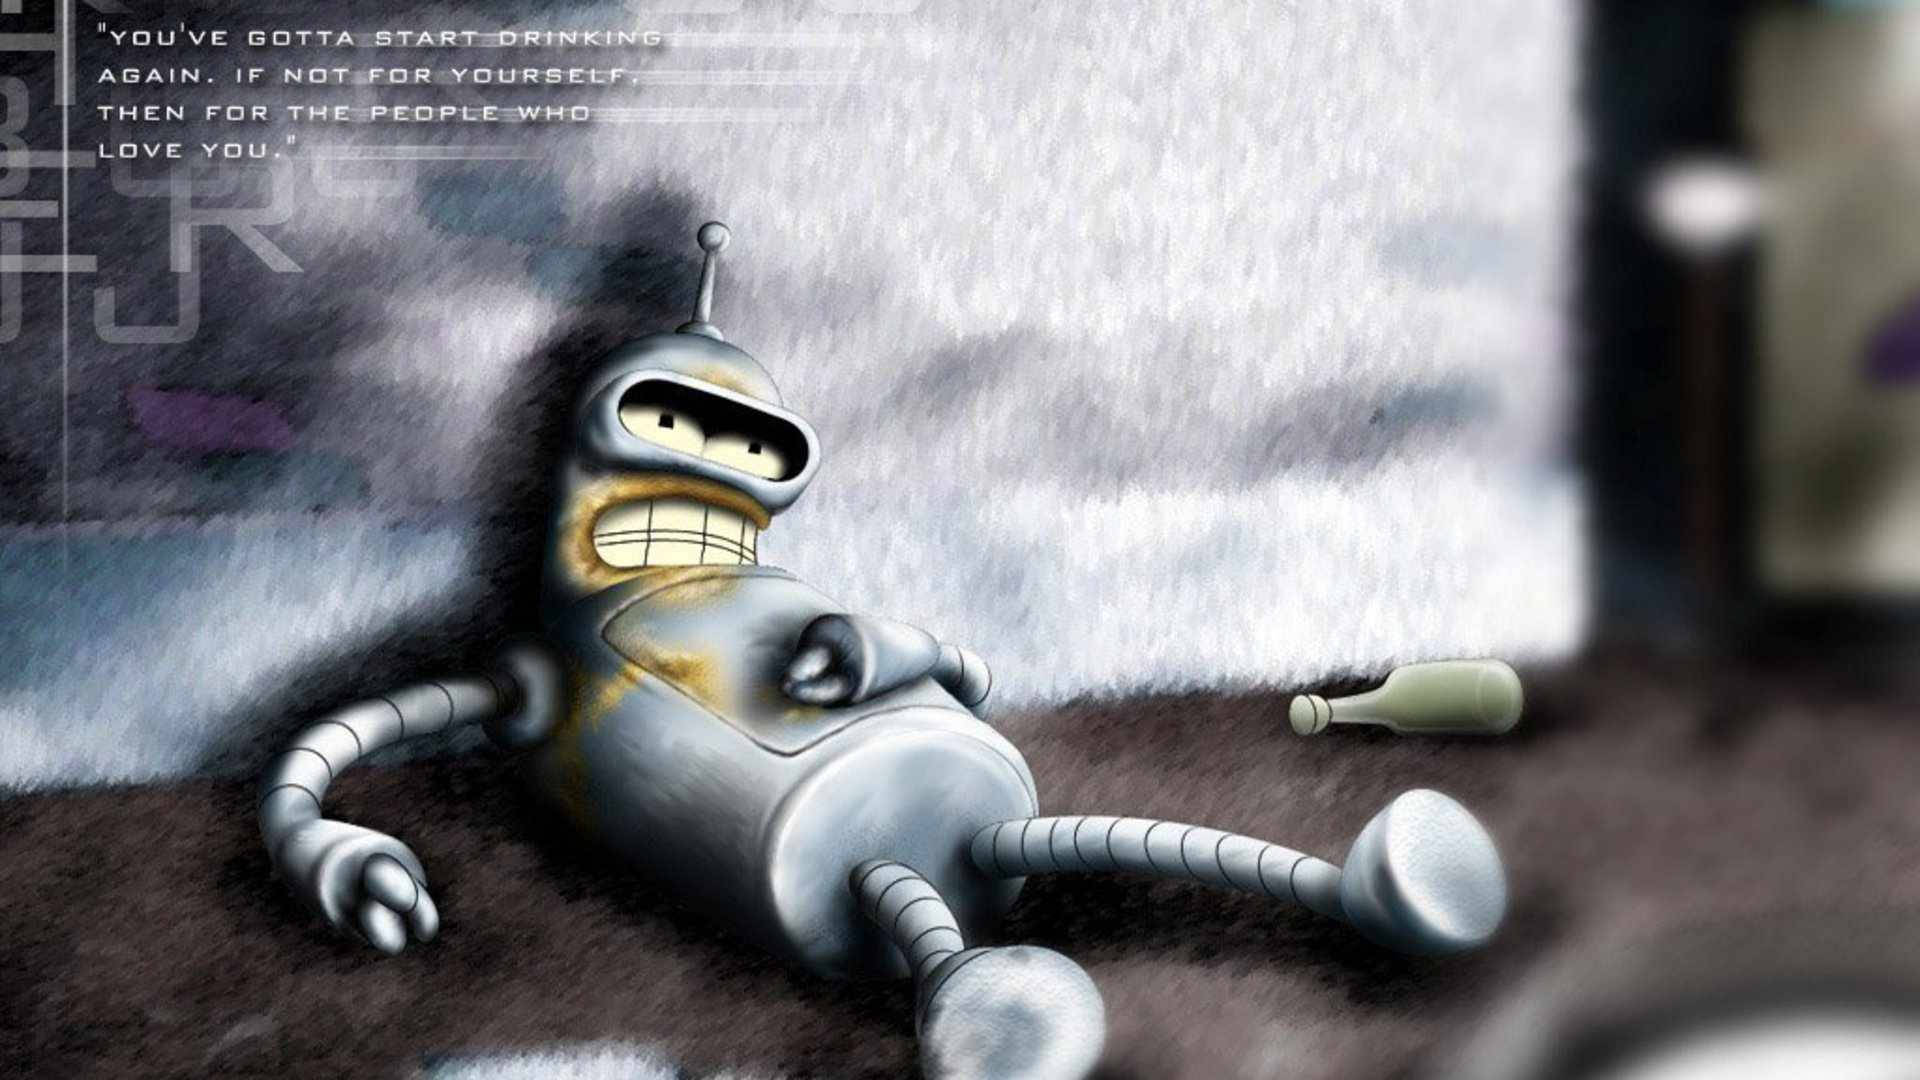 Bender, The Charismatic Robotic Protagonist From Futurama Background